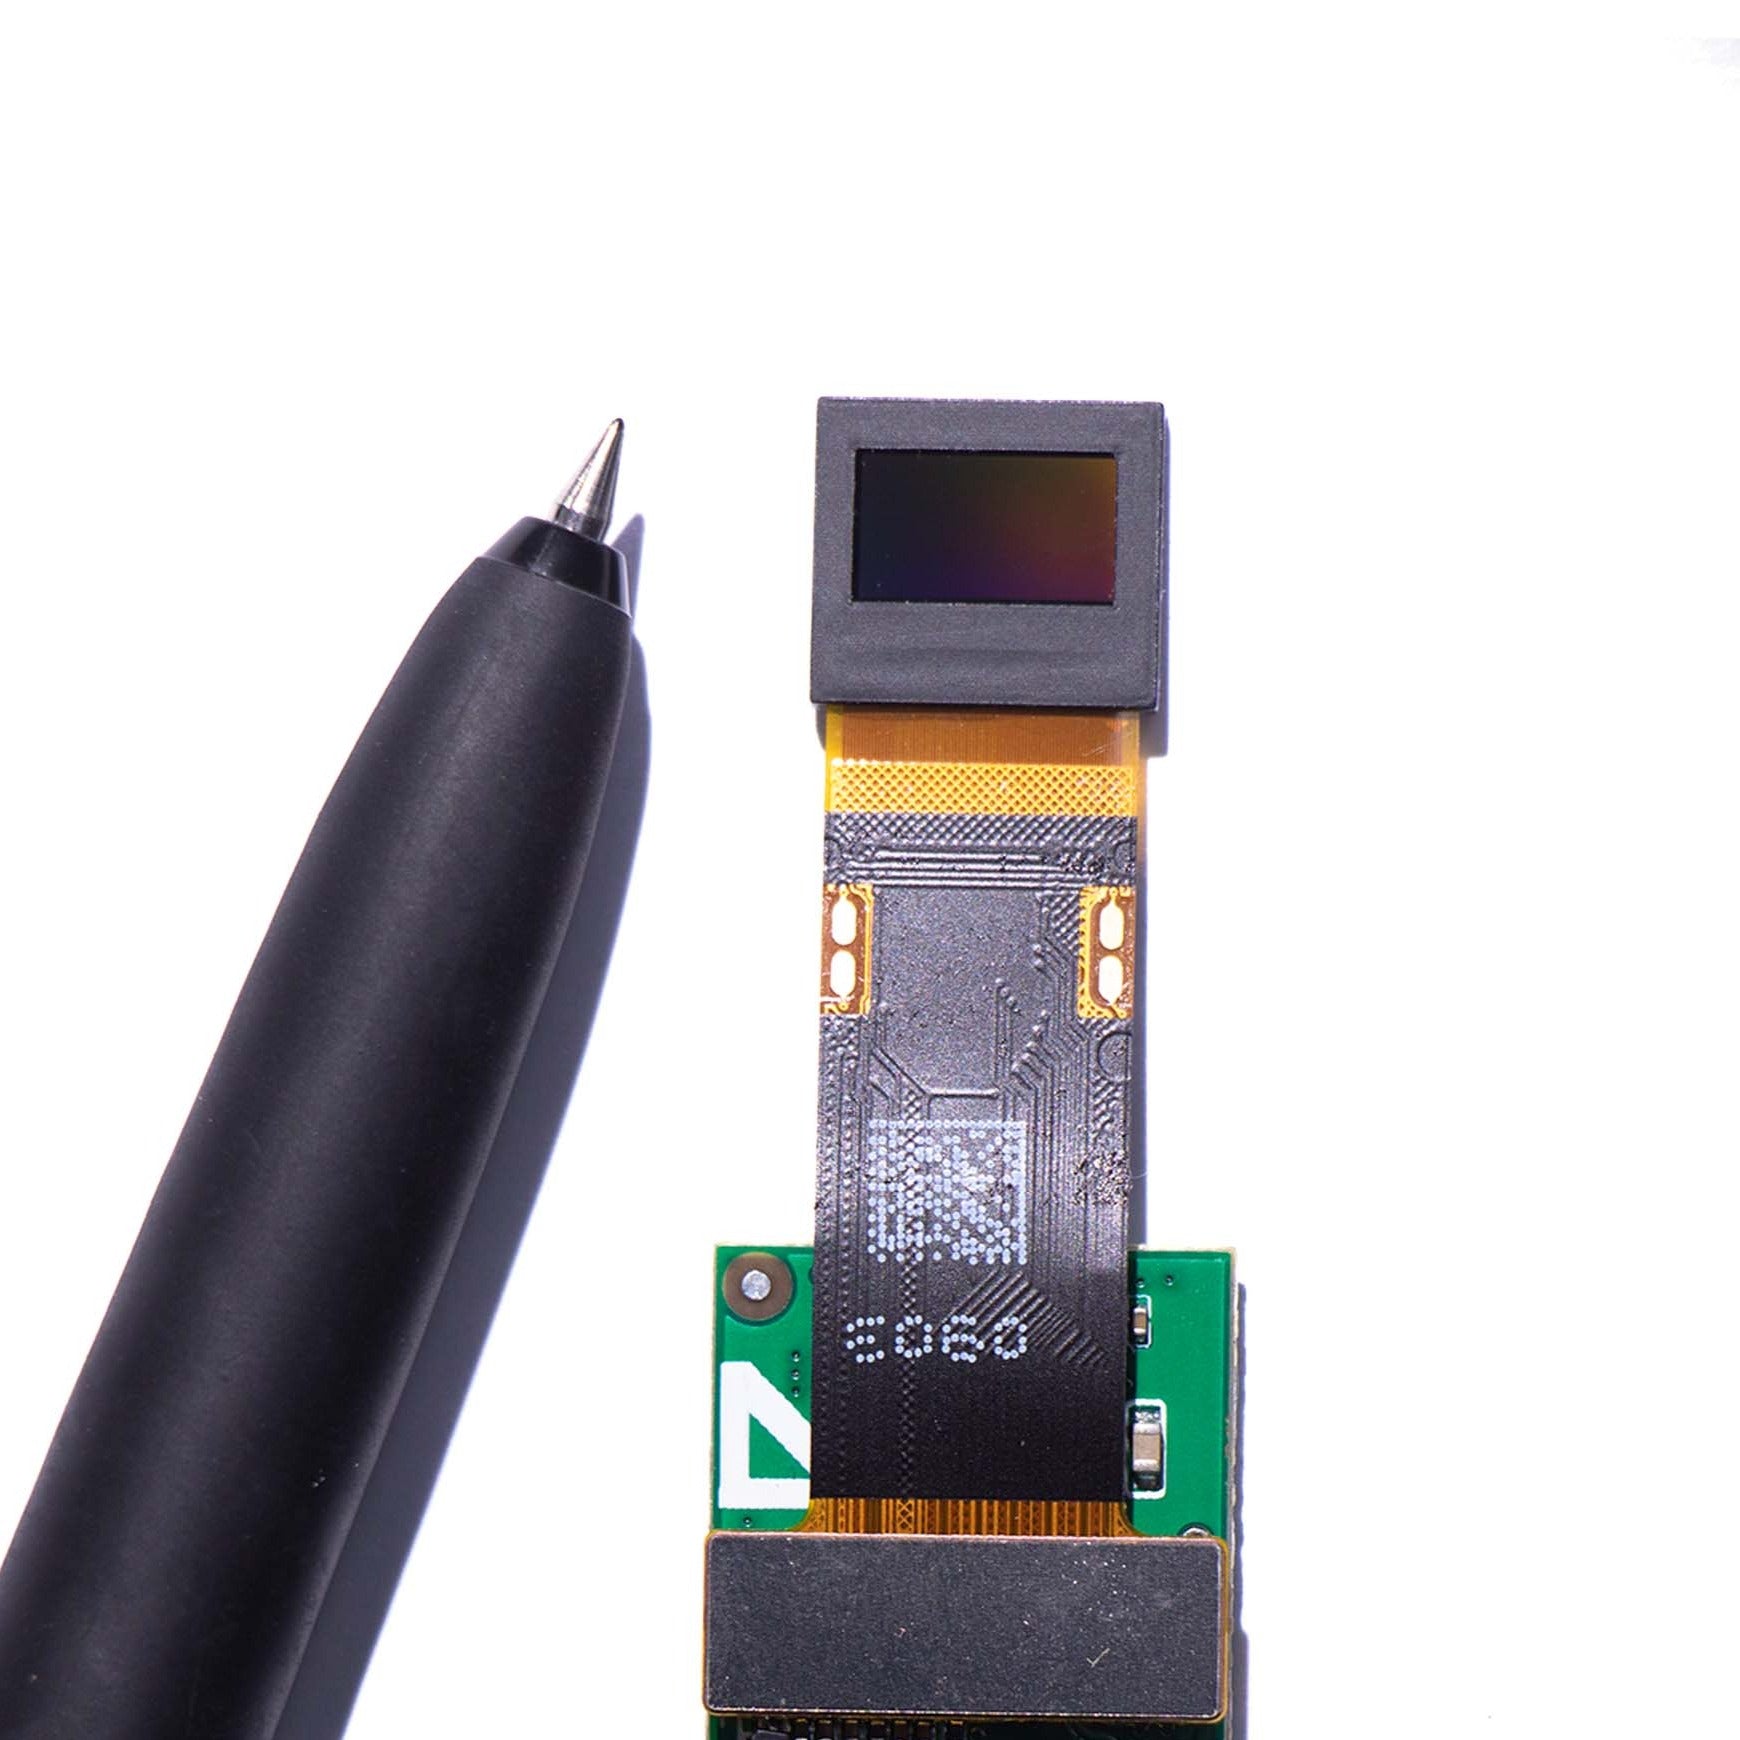 Micro OLED display screen compared in size to a water-based pen